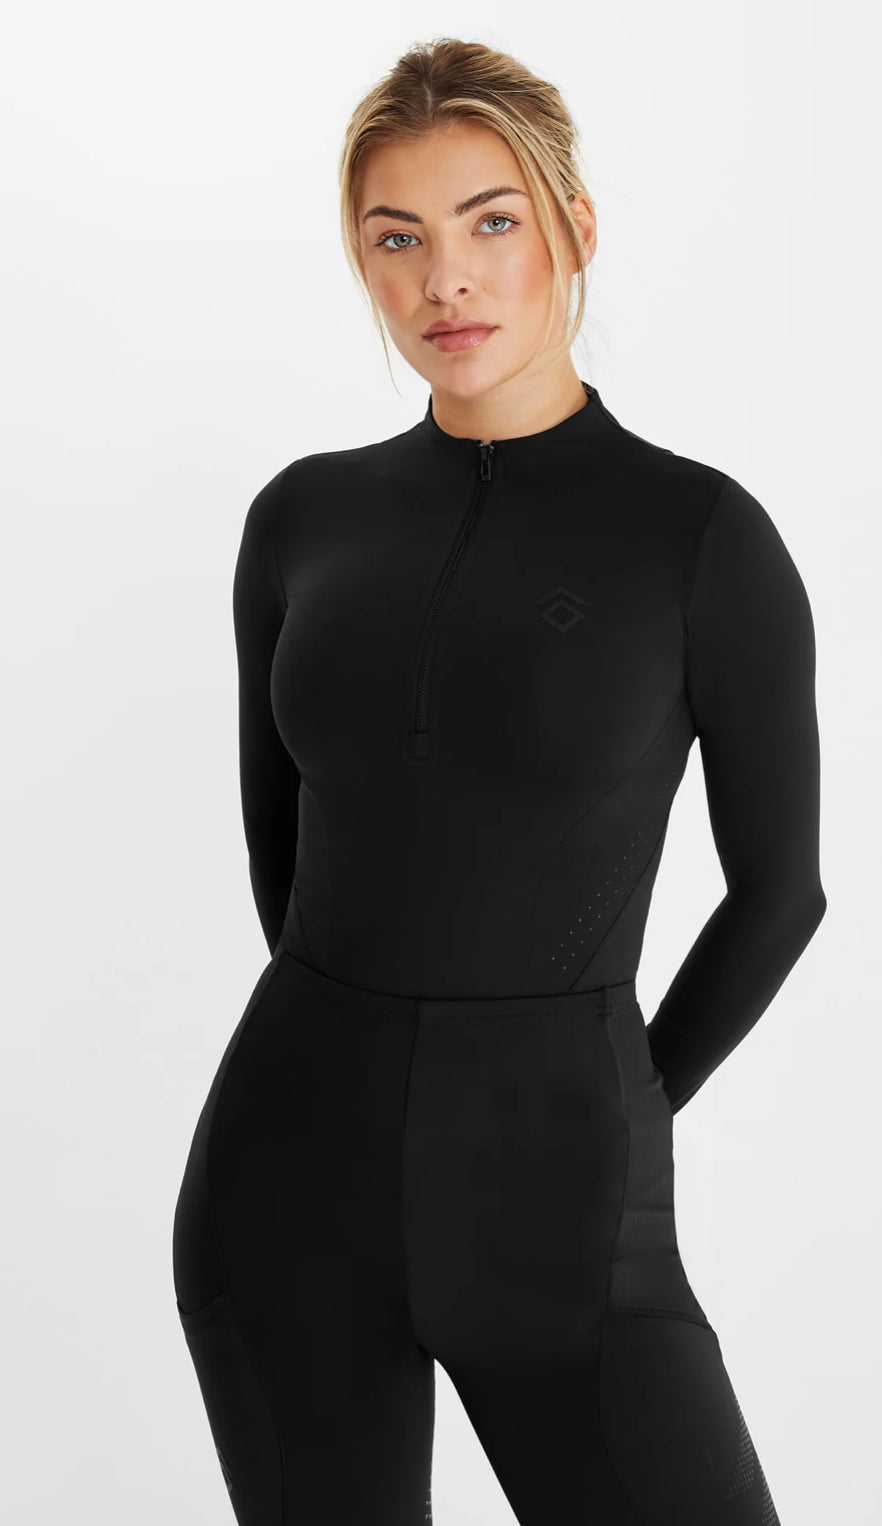 Aztec Diamond Core Base Layer in Black: Essential Riding Undergarment - Gee Gee Equine 